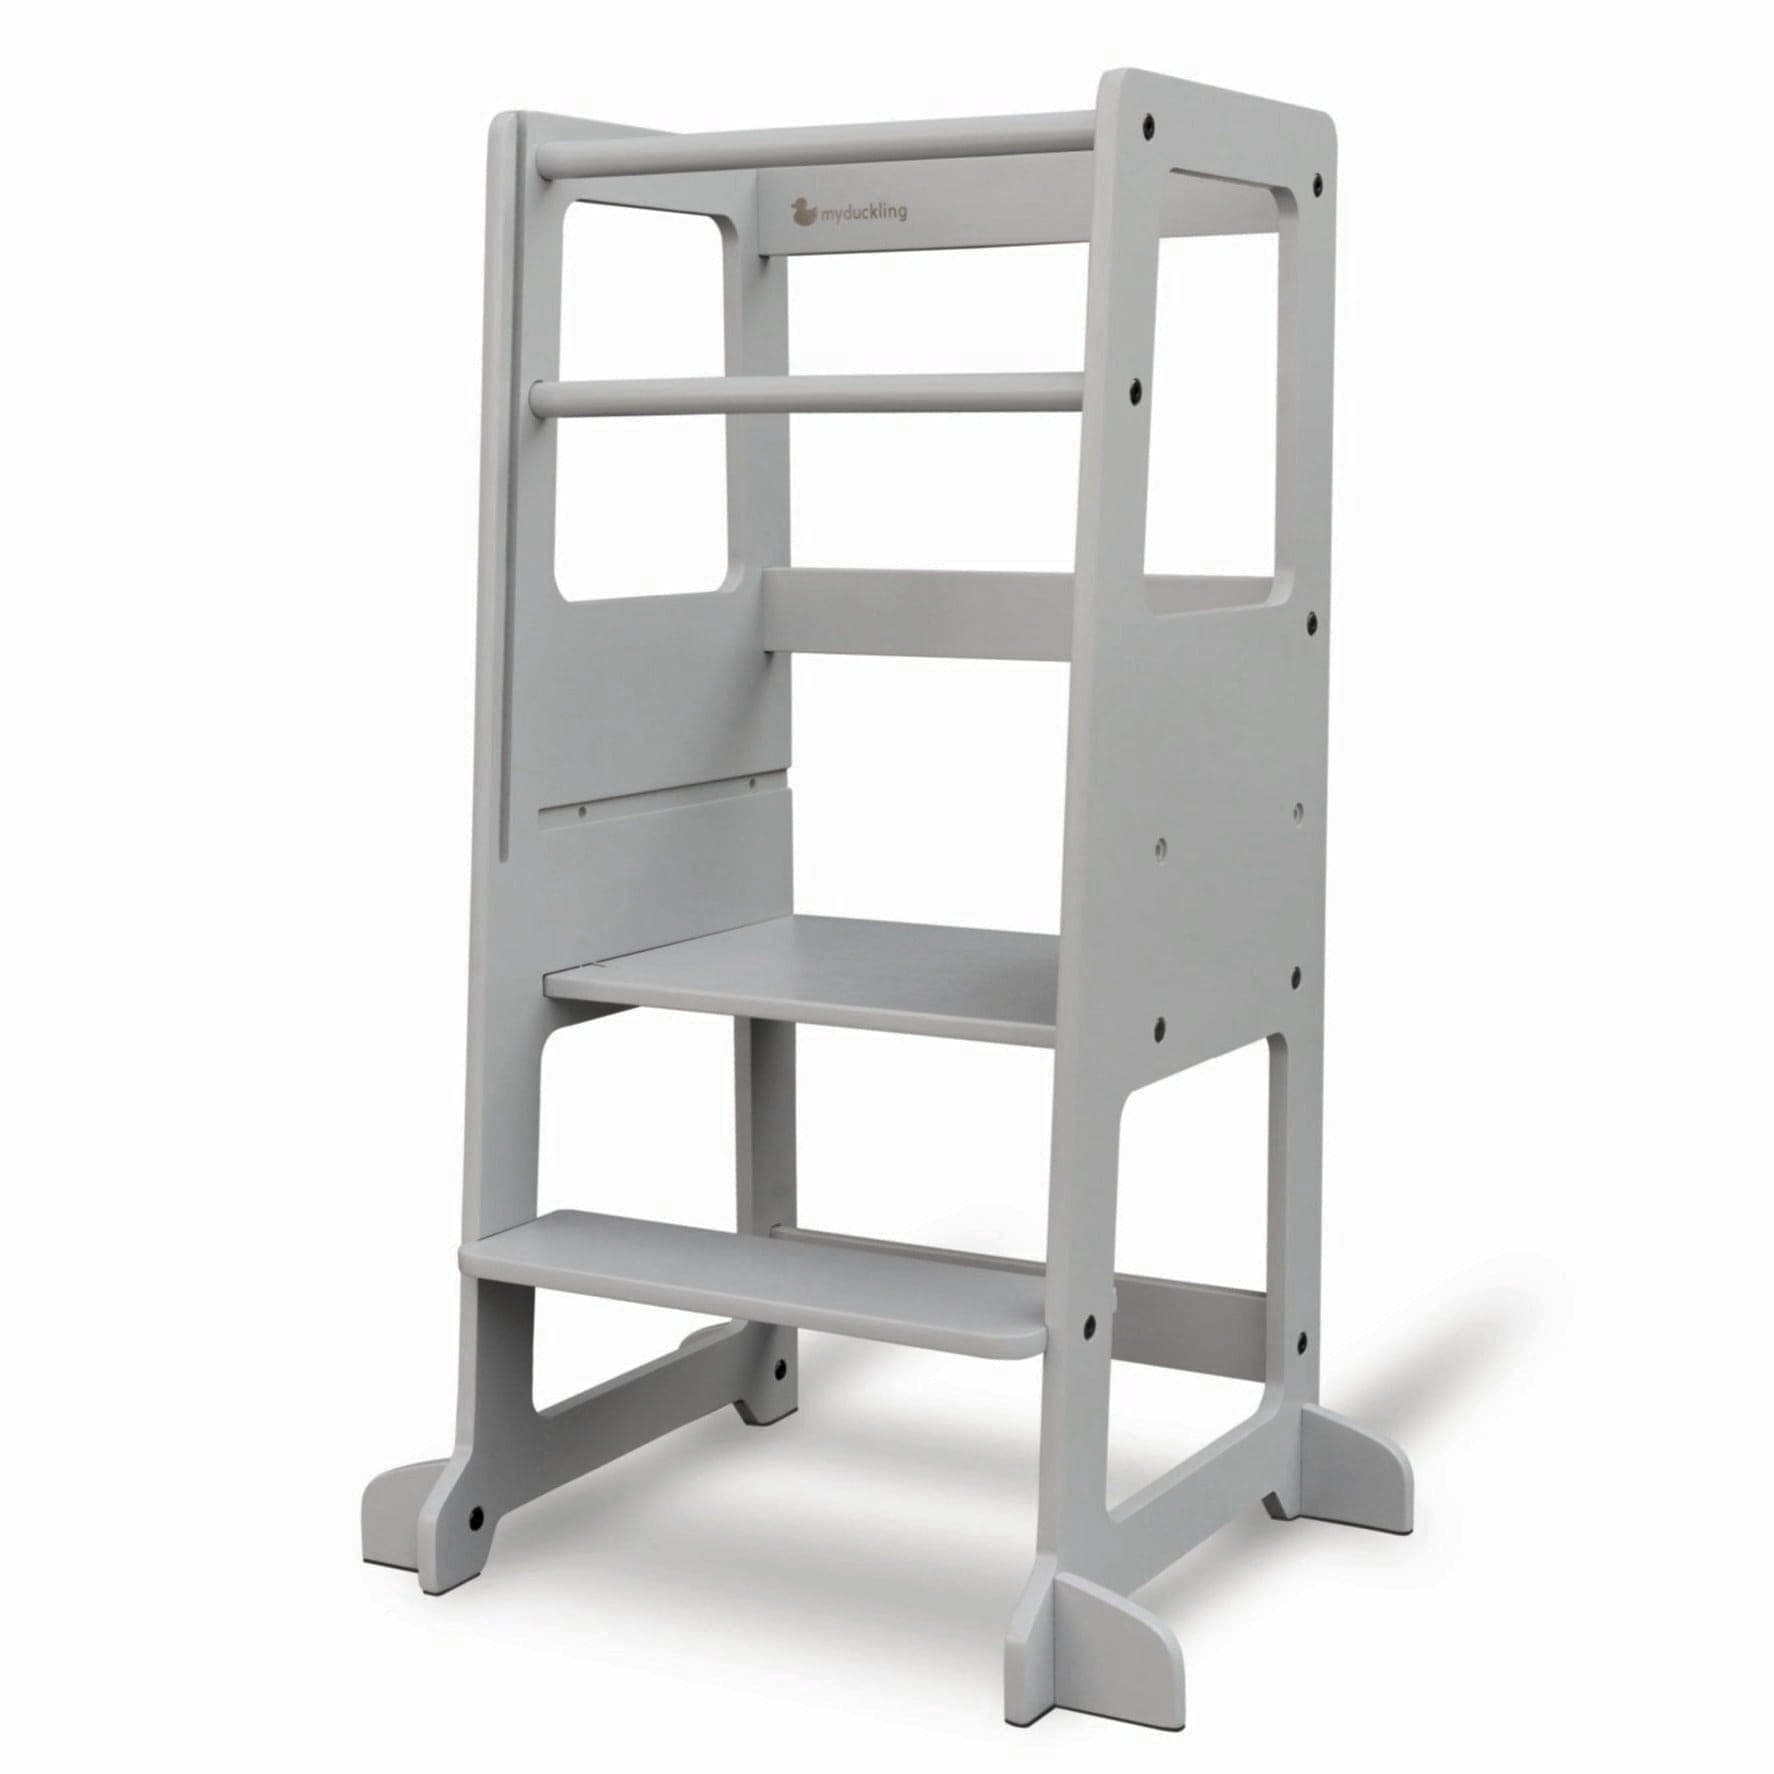 My Duckling LOLA Deluxe Learning Tower - Grey